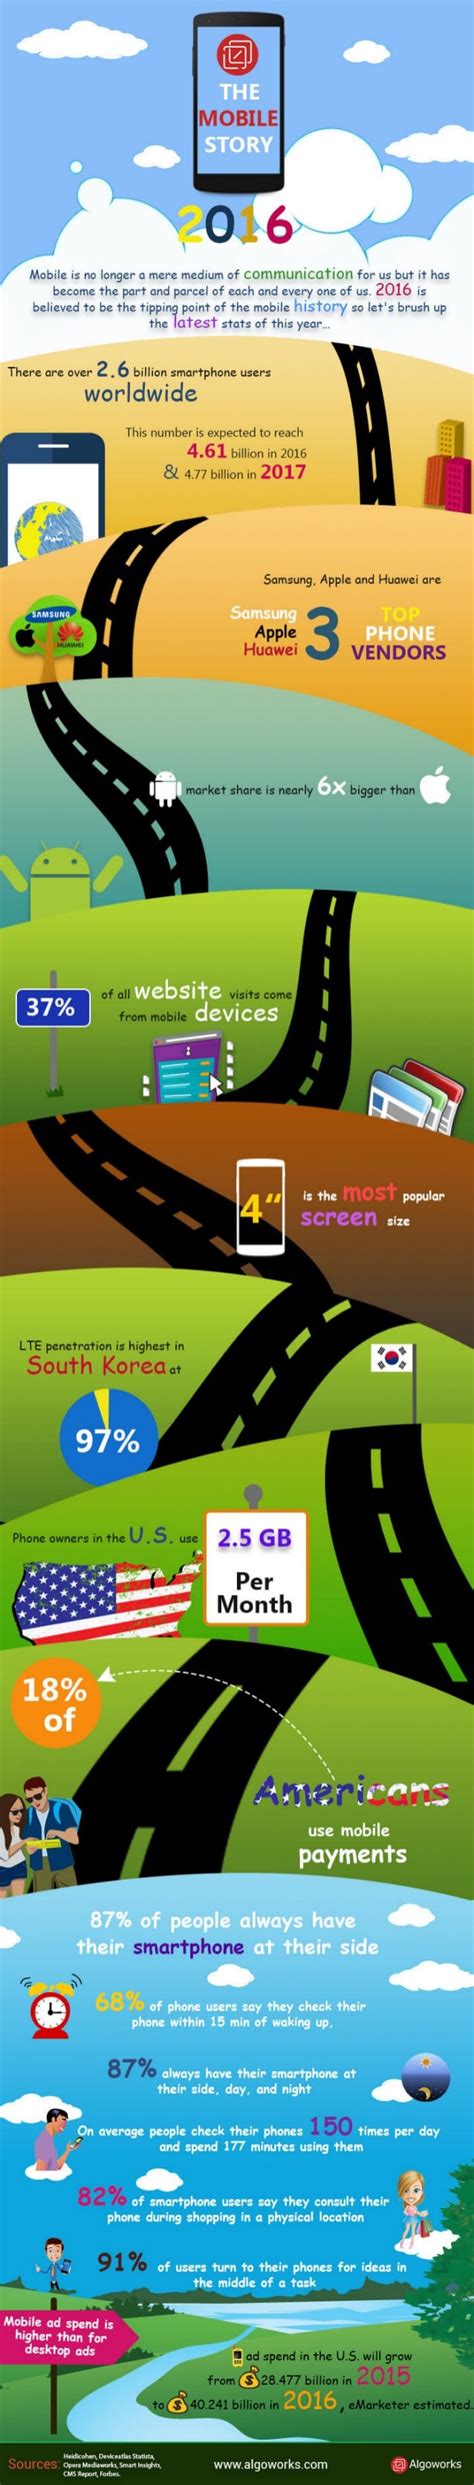 The Mobile Story 2016 Infographic